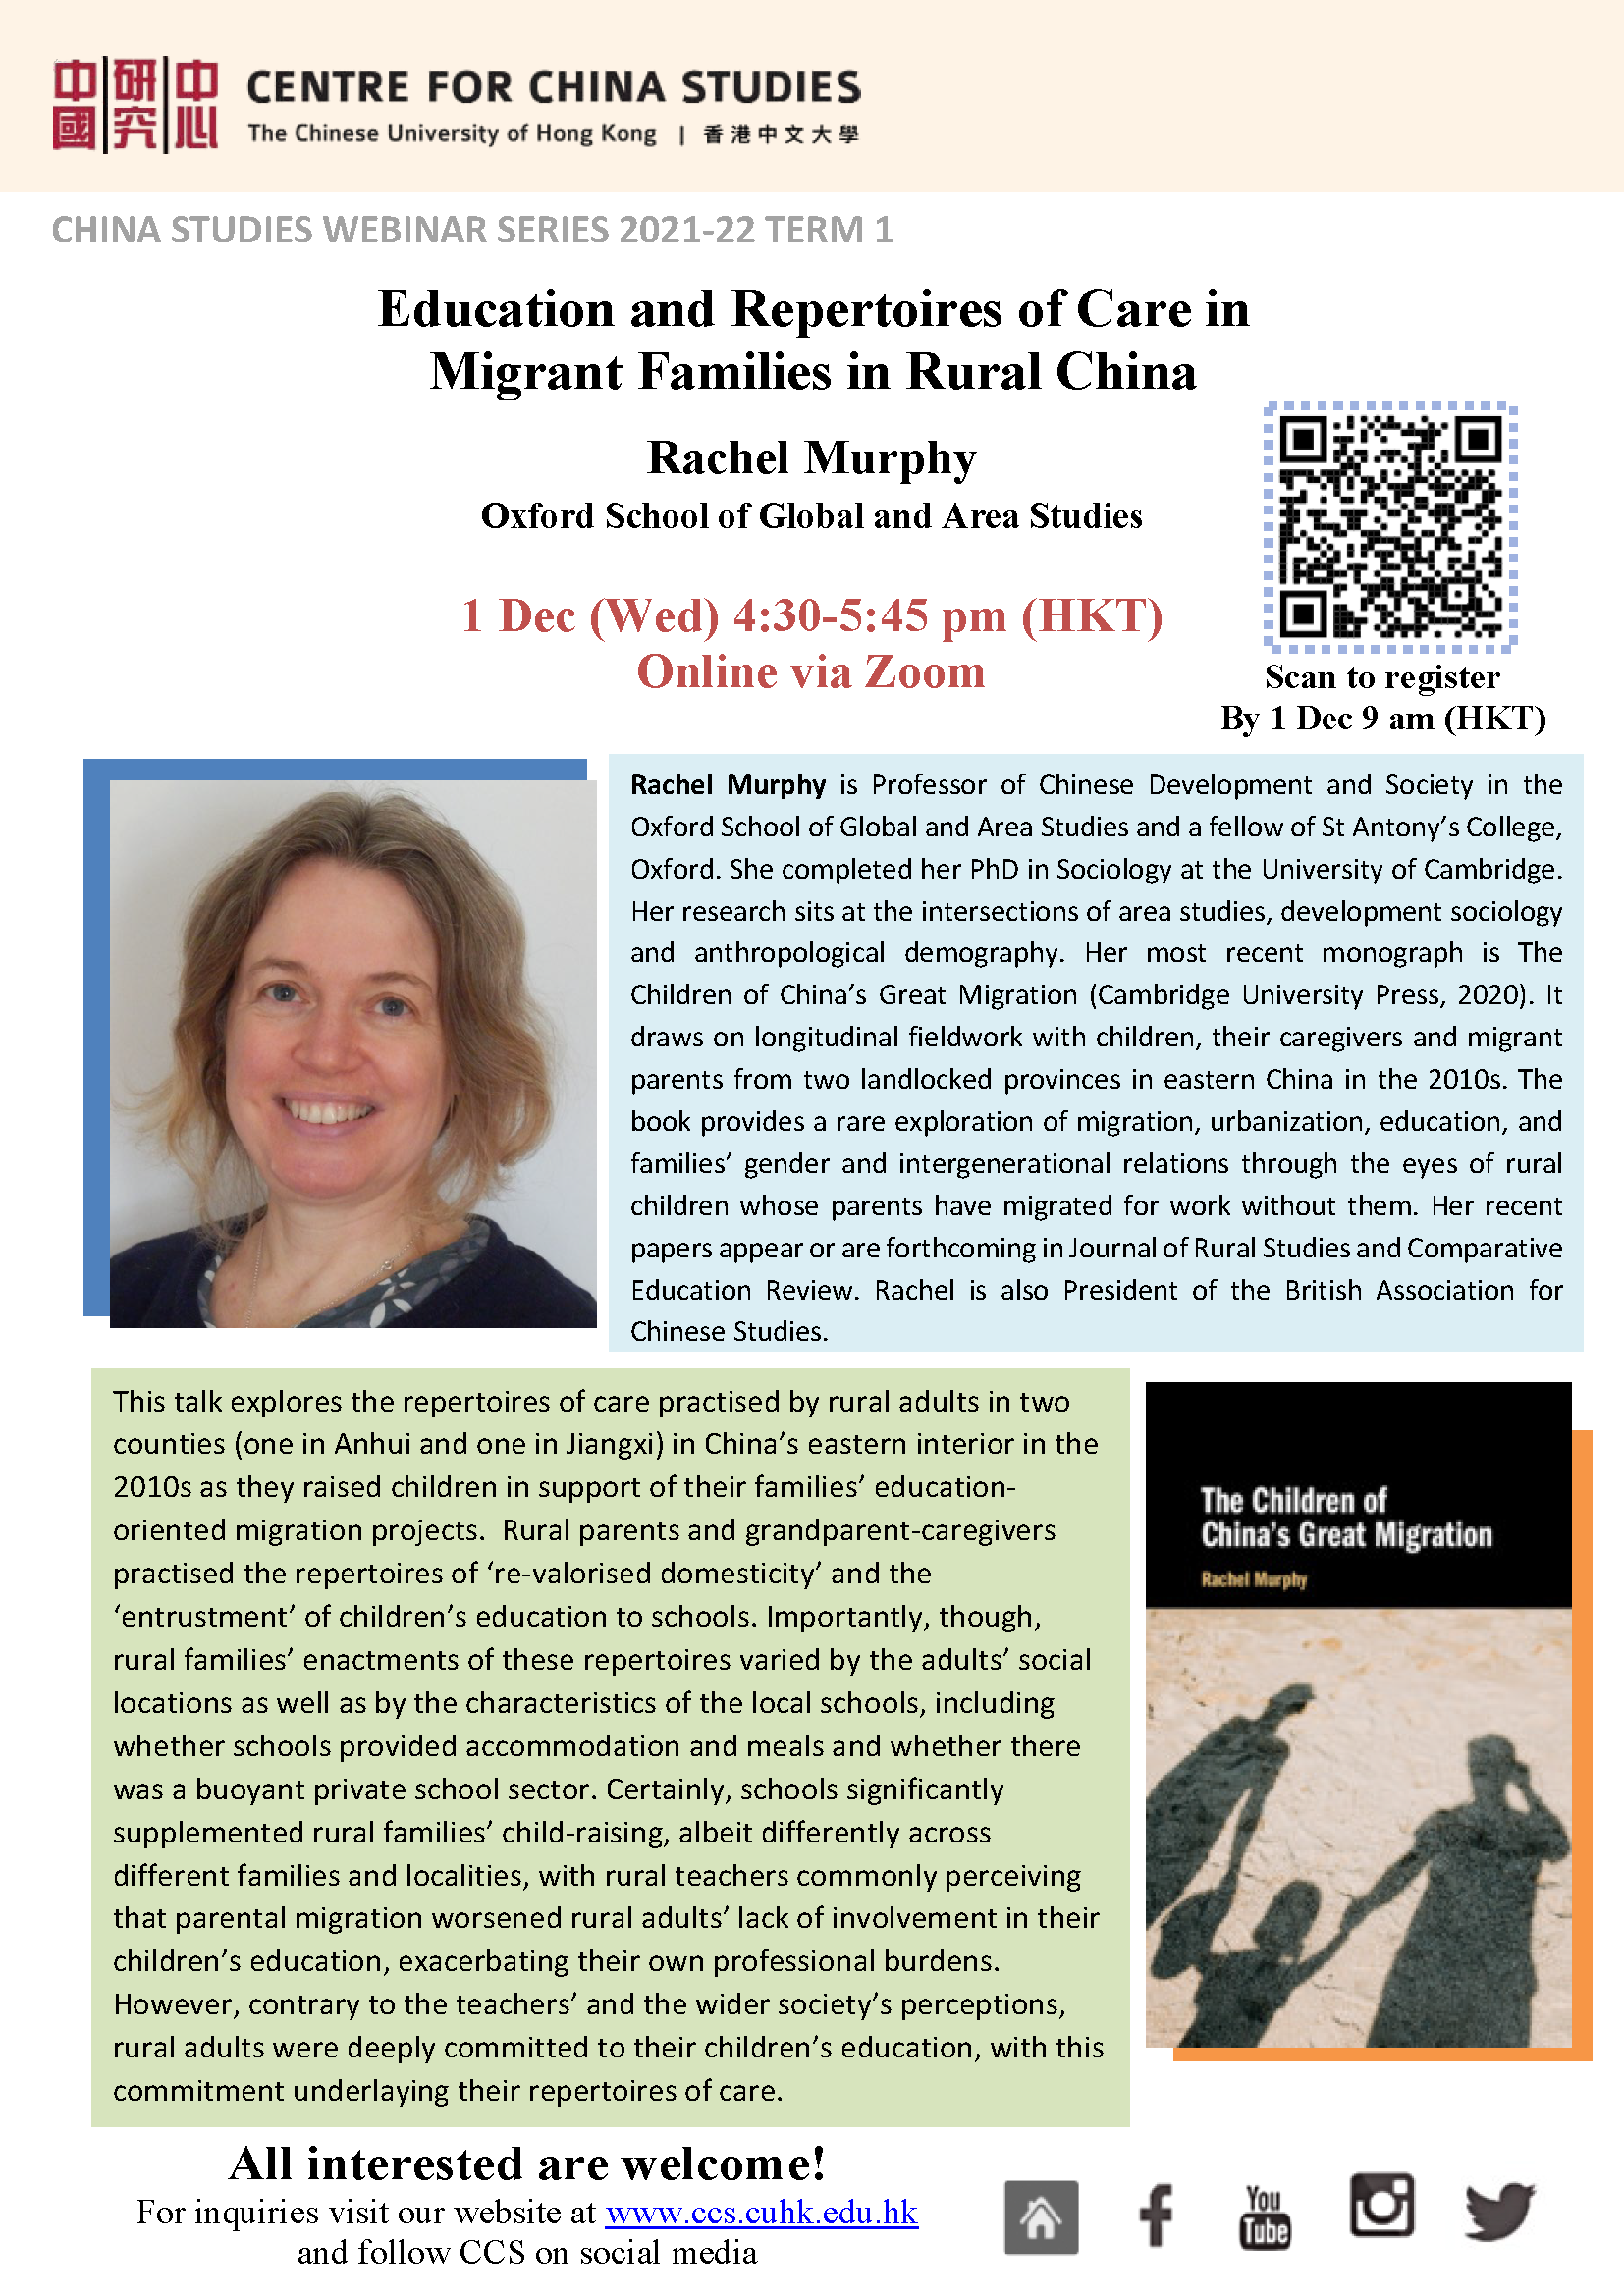 Webinar: “Education and Repertoires of Care in Migrant Families in ...